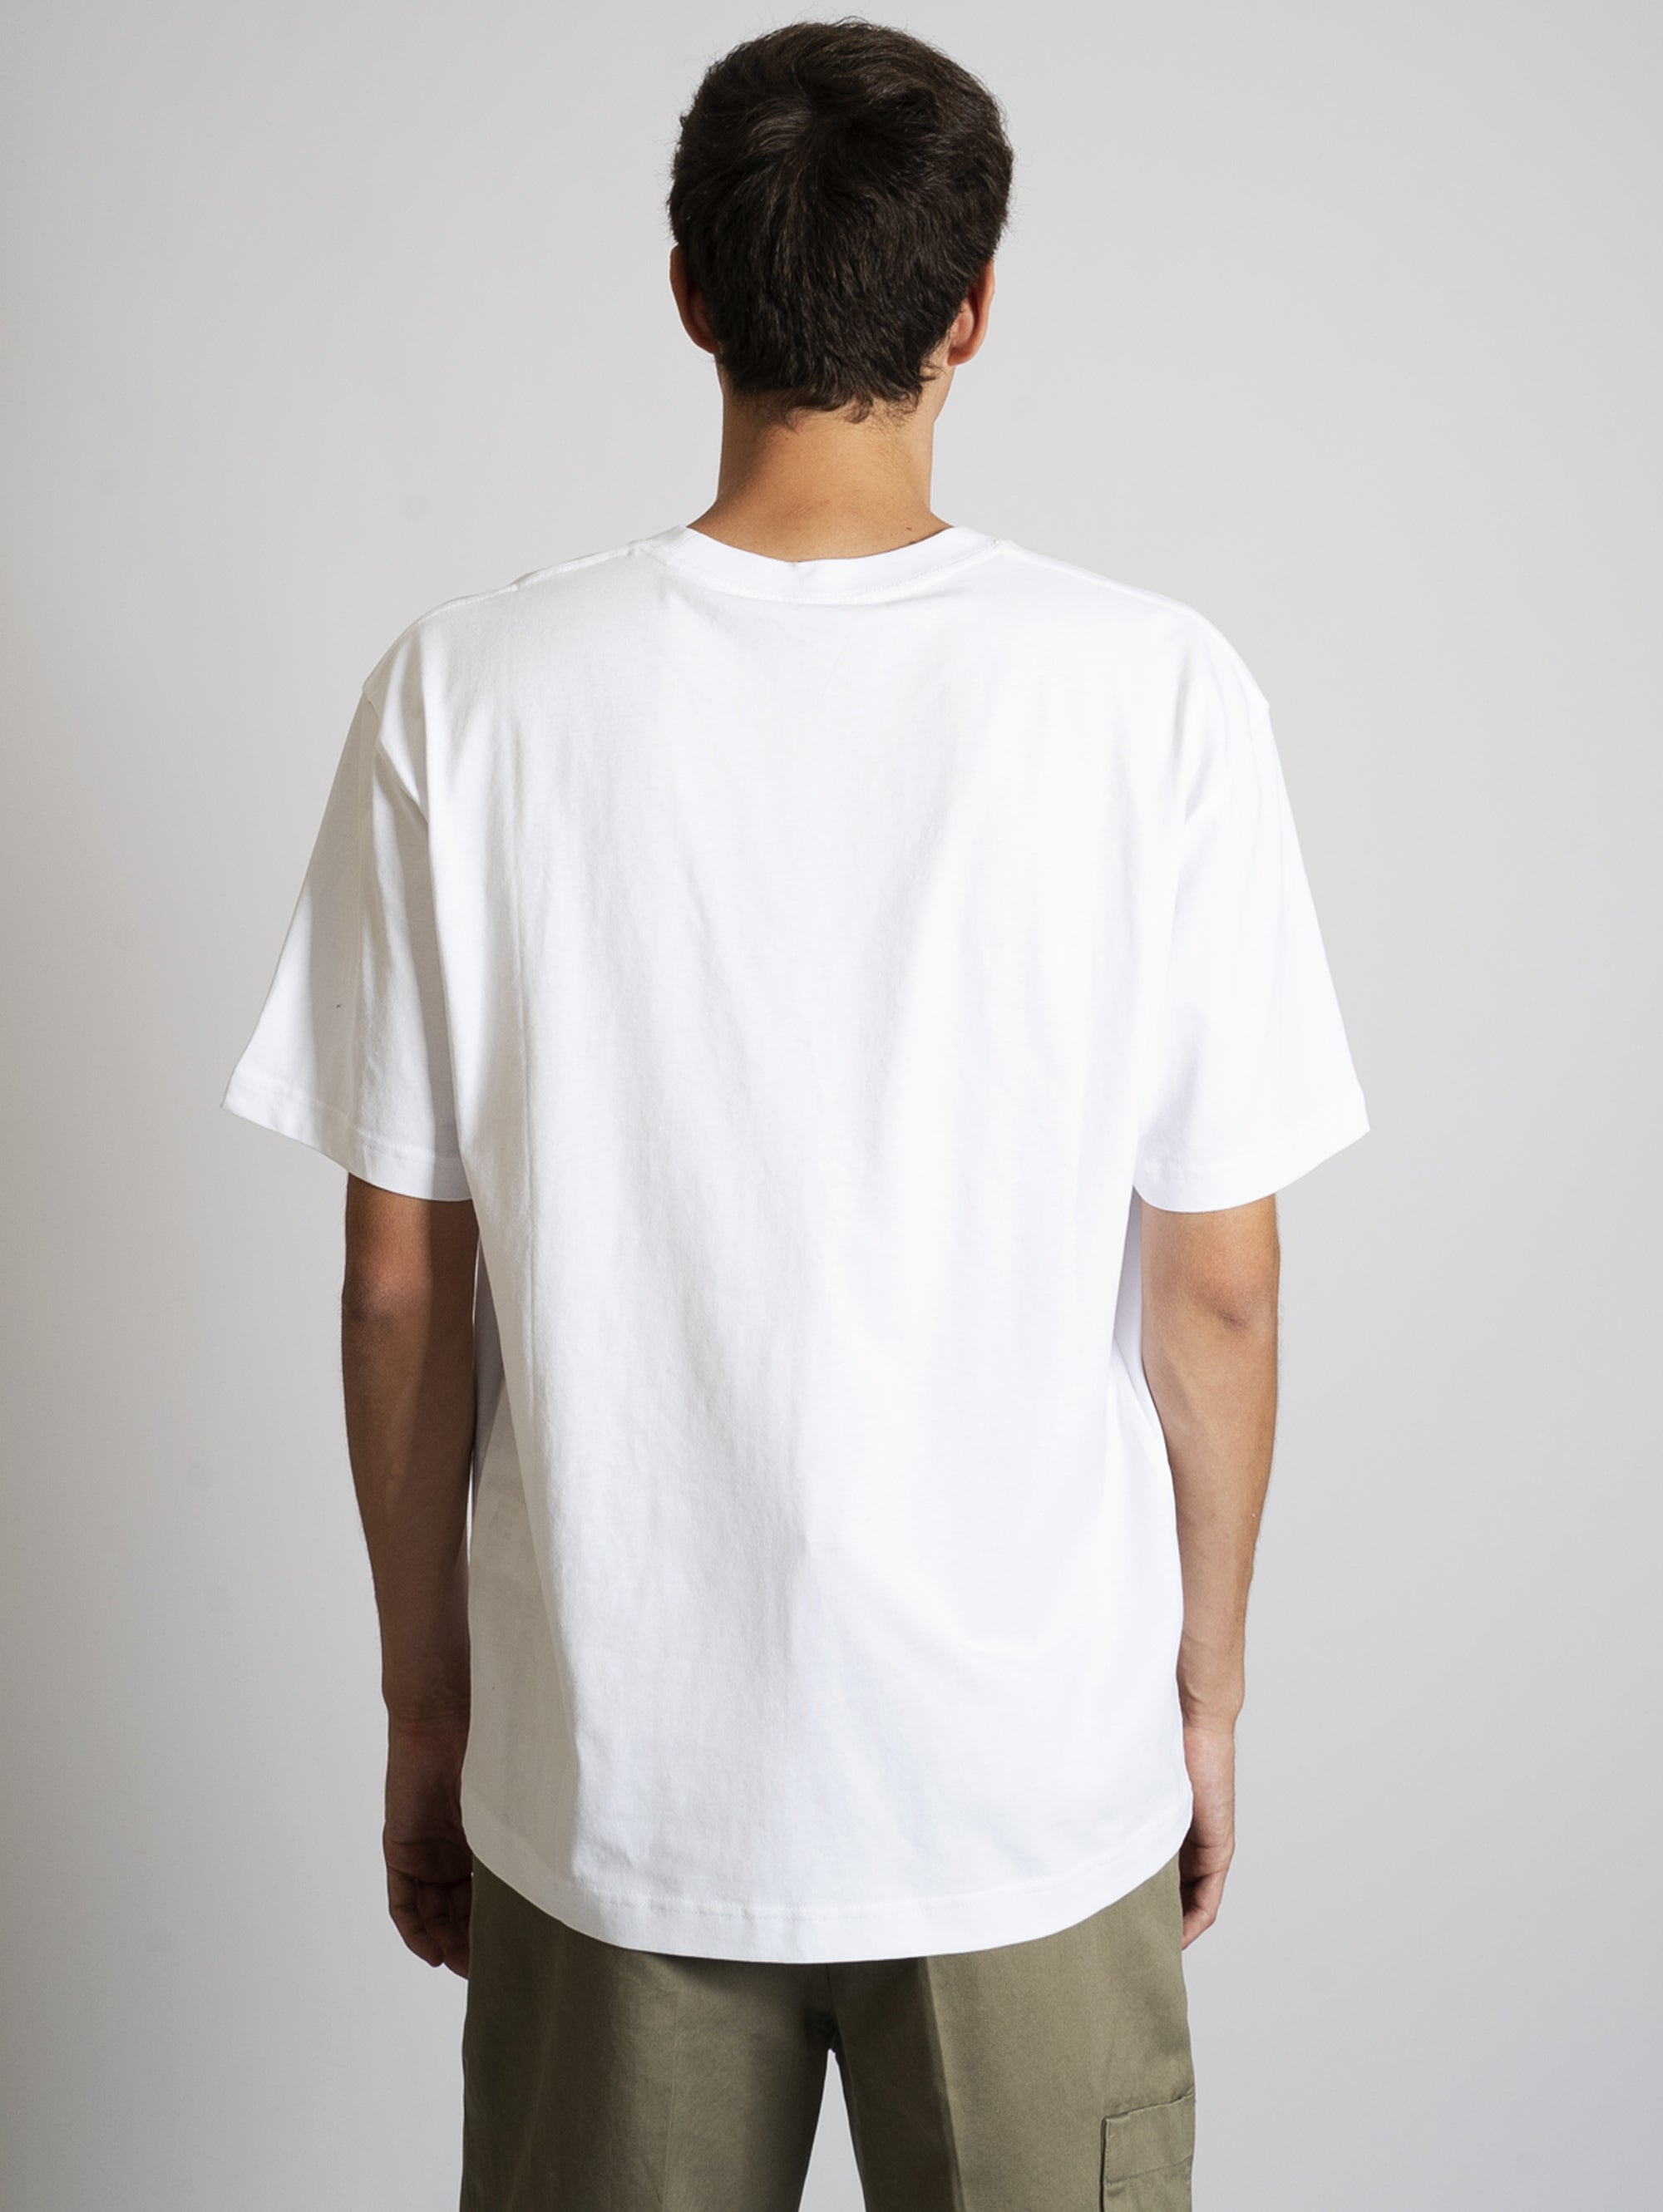 T-shirt with White Print